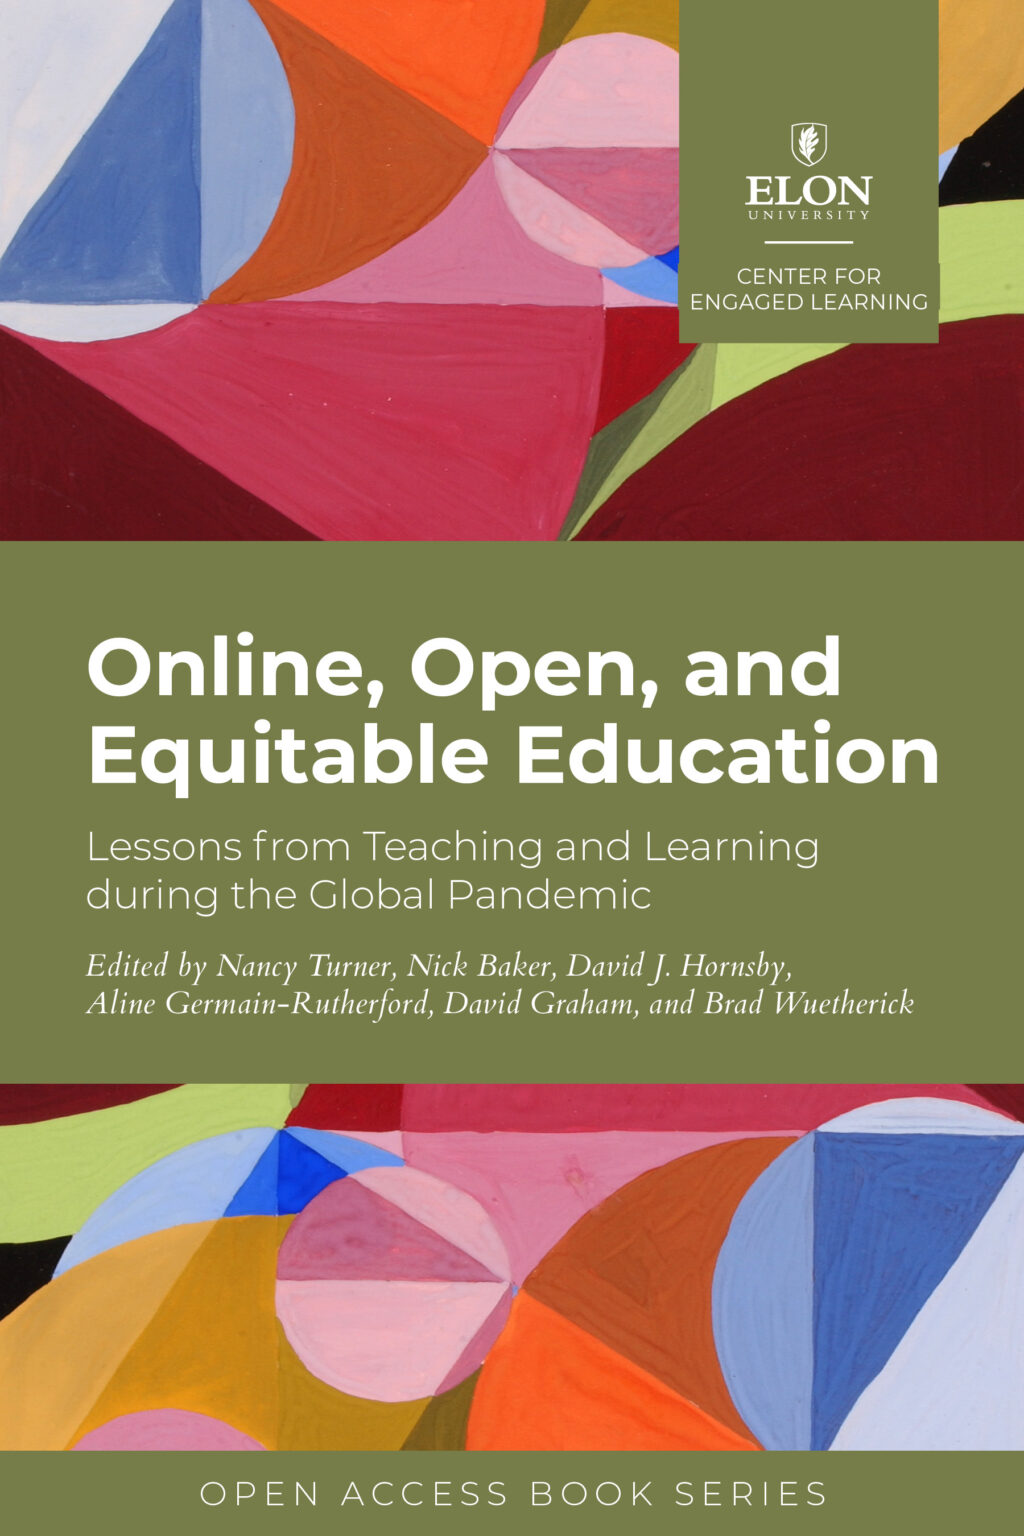 Book cover of "Online, Open, and Equitable Education: Lessons from Teaching and Learning during the Global Pandemic" Edited by Nancy Turner, Nick Baker, David J. Hornsby, Aline Germain-Rutherford, David Graham, and Brad Wuetherick